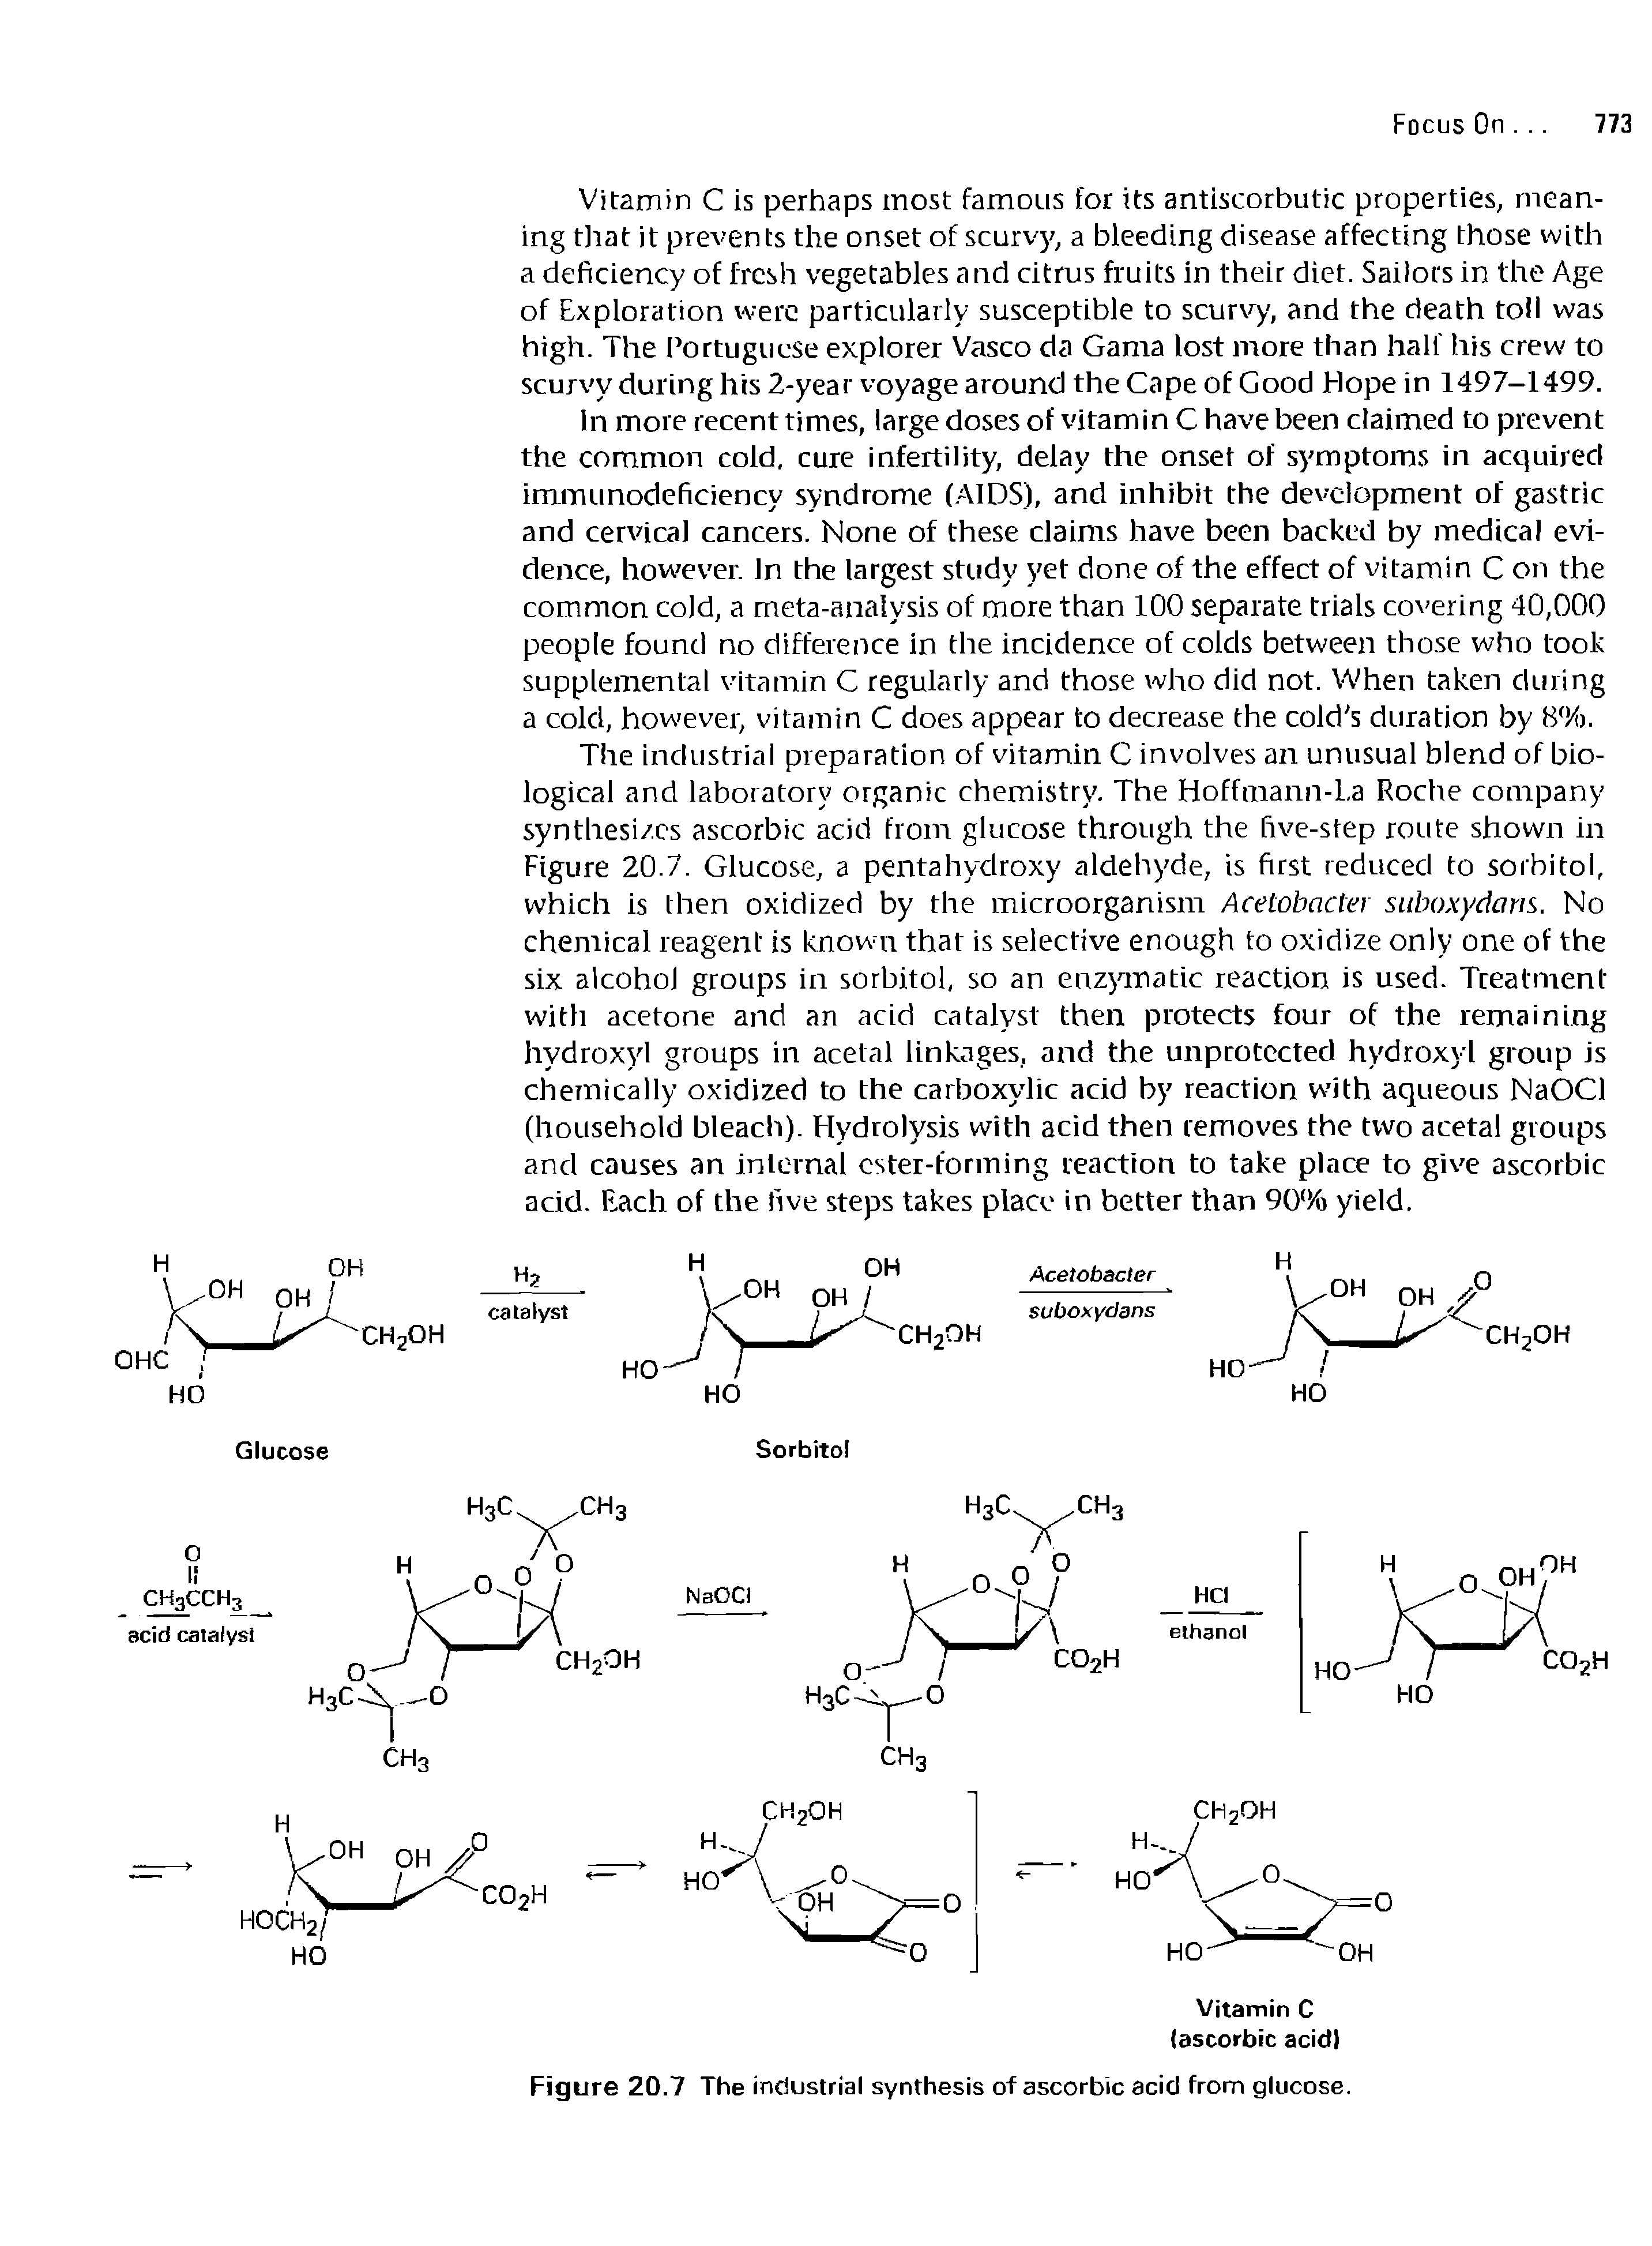 Figure 20.7 The industrial synthesis of ascorbic acid from glucose.